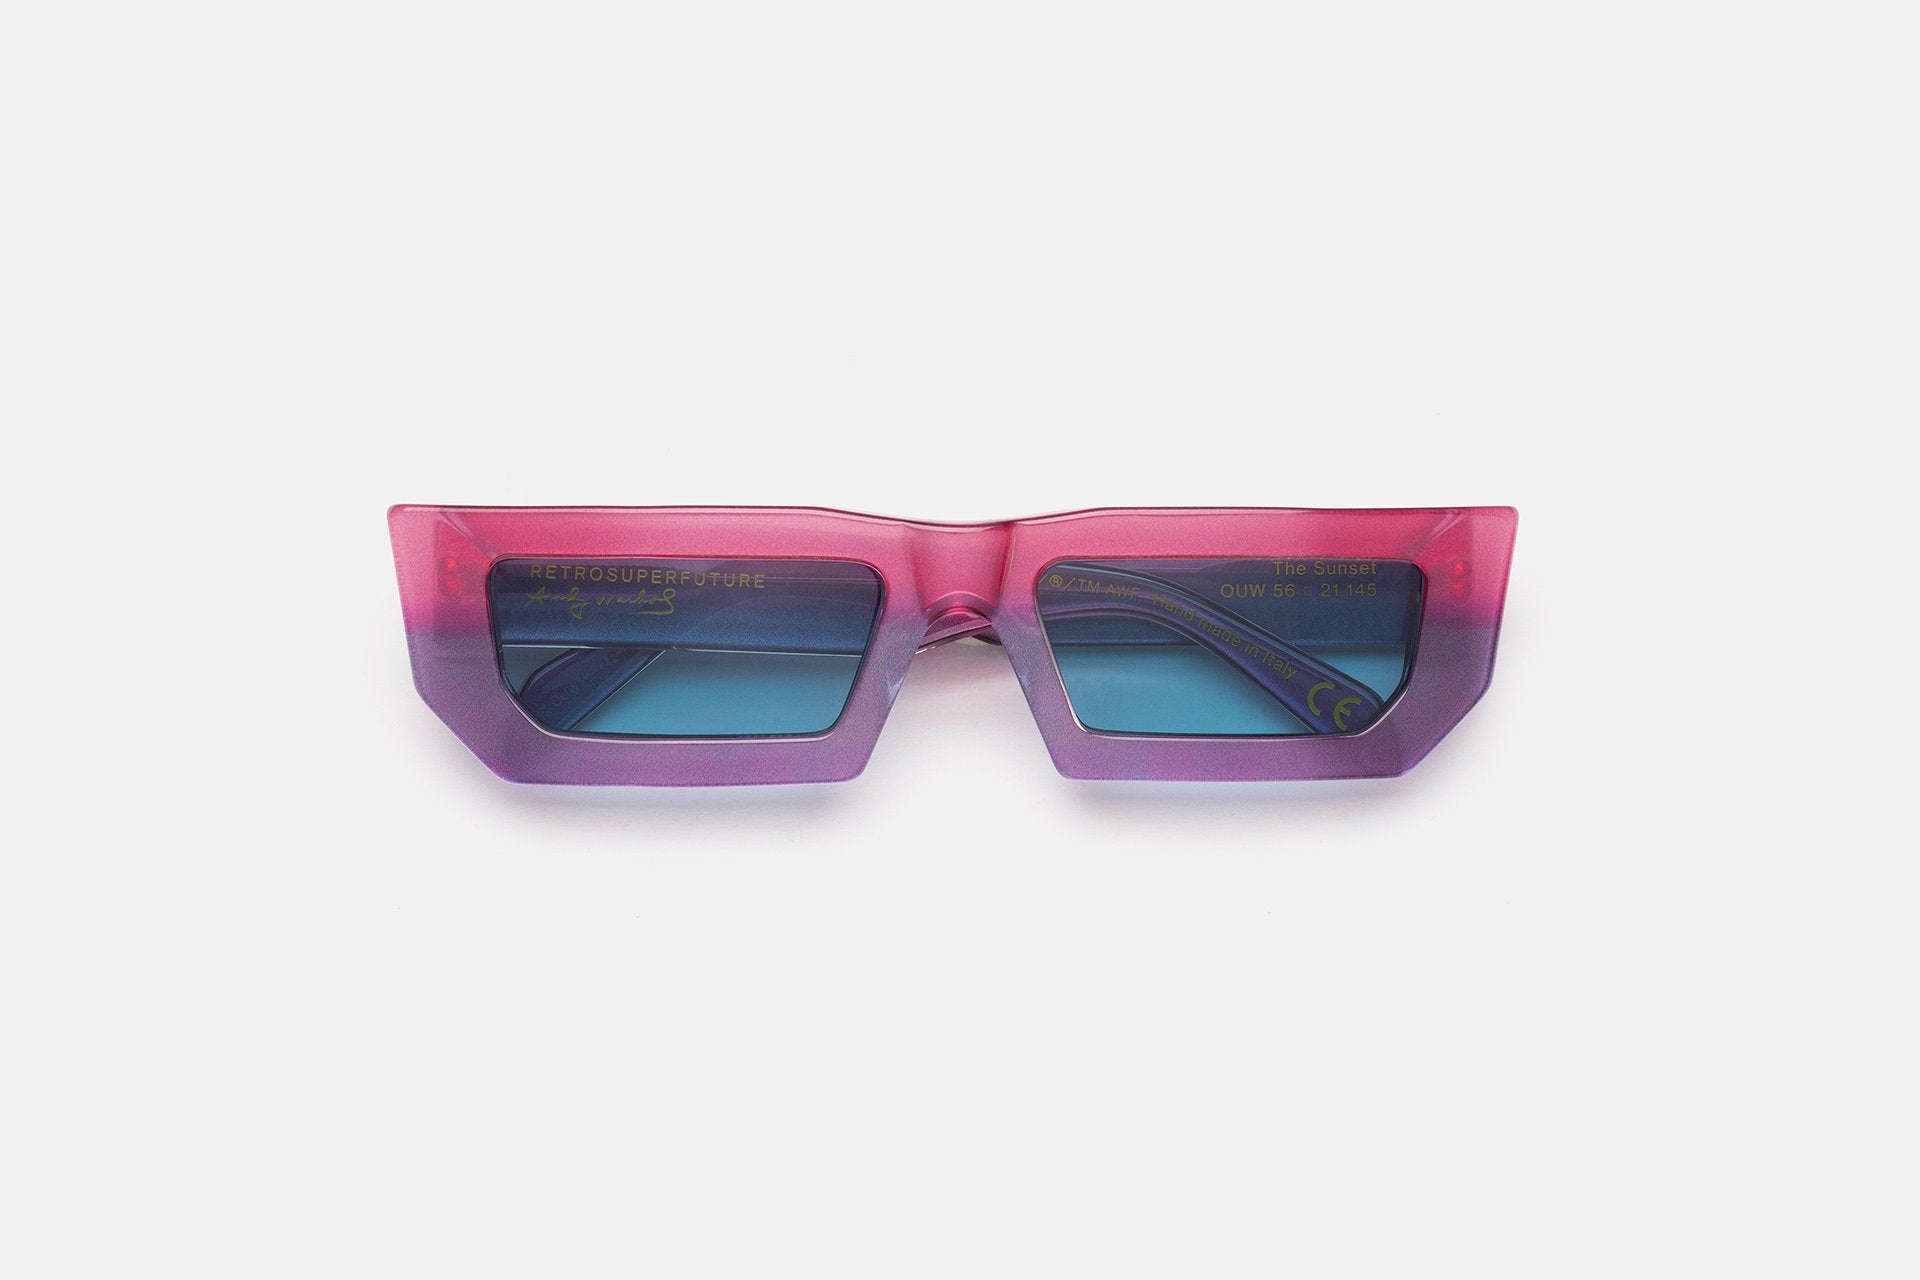 RSF x The Andy Warhol Foundation/The Sunset Violet